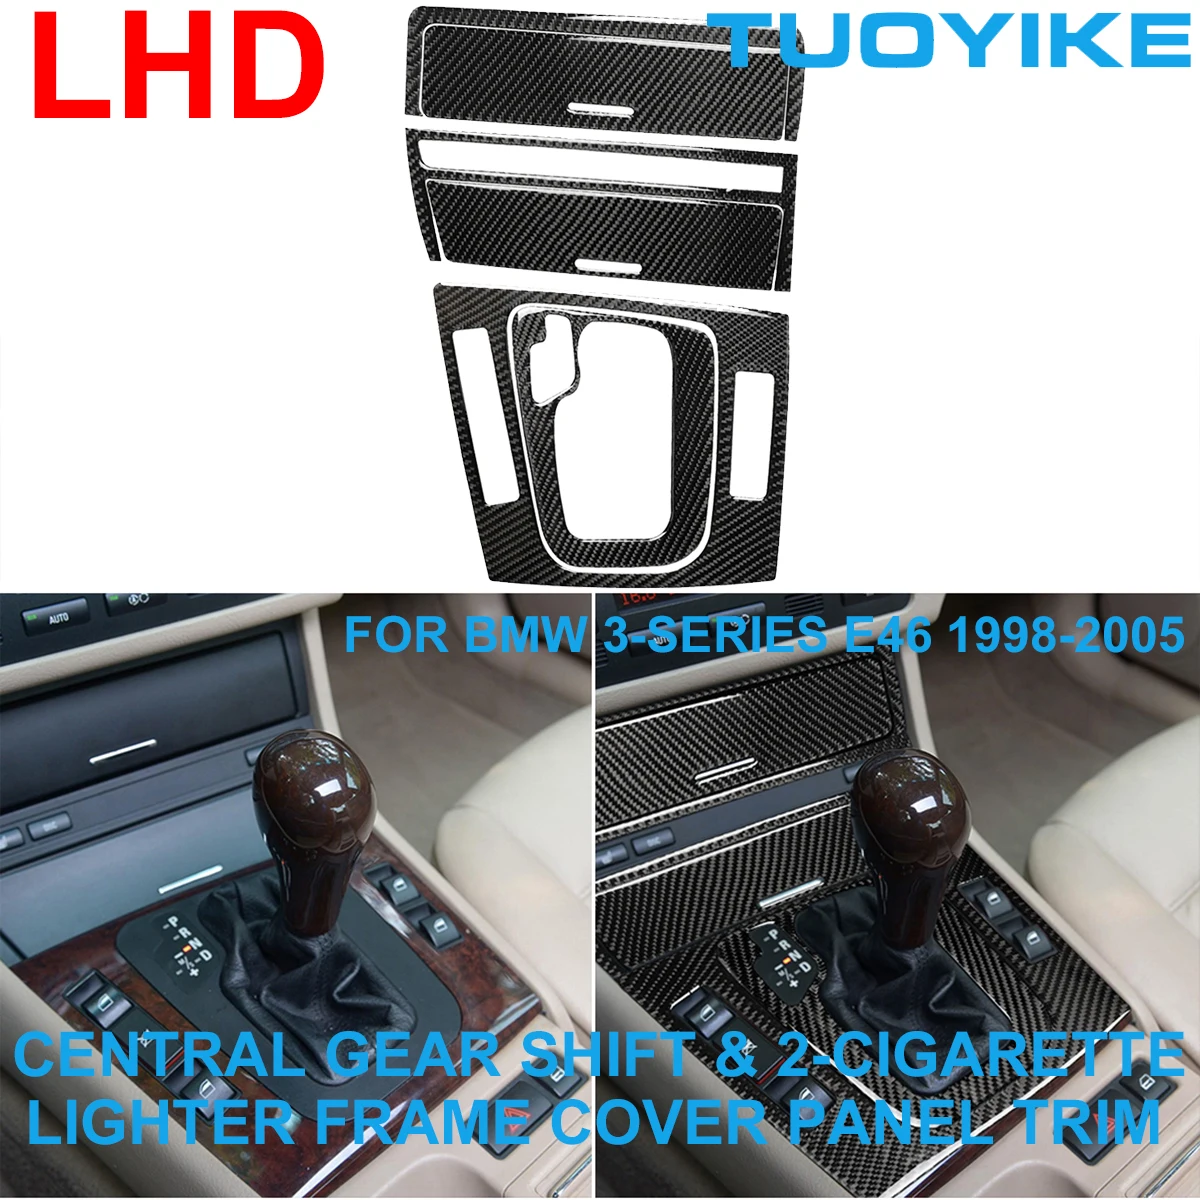 

LHD RHD Car Styling Carbon Fiber Central Gear Shift 2-Cigarette Lighters Frame Cover Panel Trim For BMW 3-Series E46 1998-2005